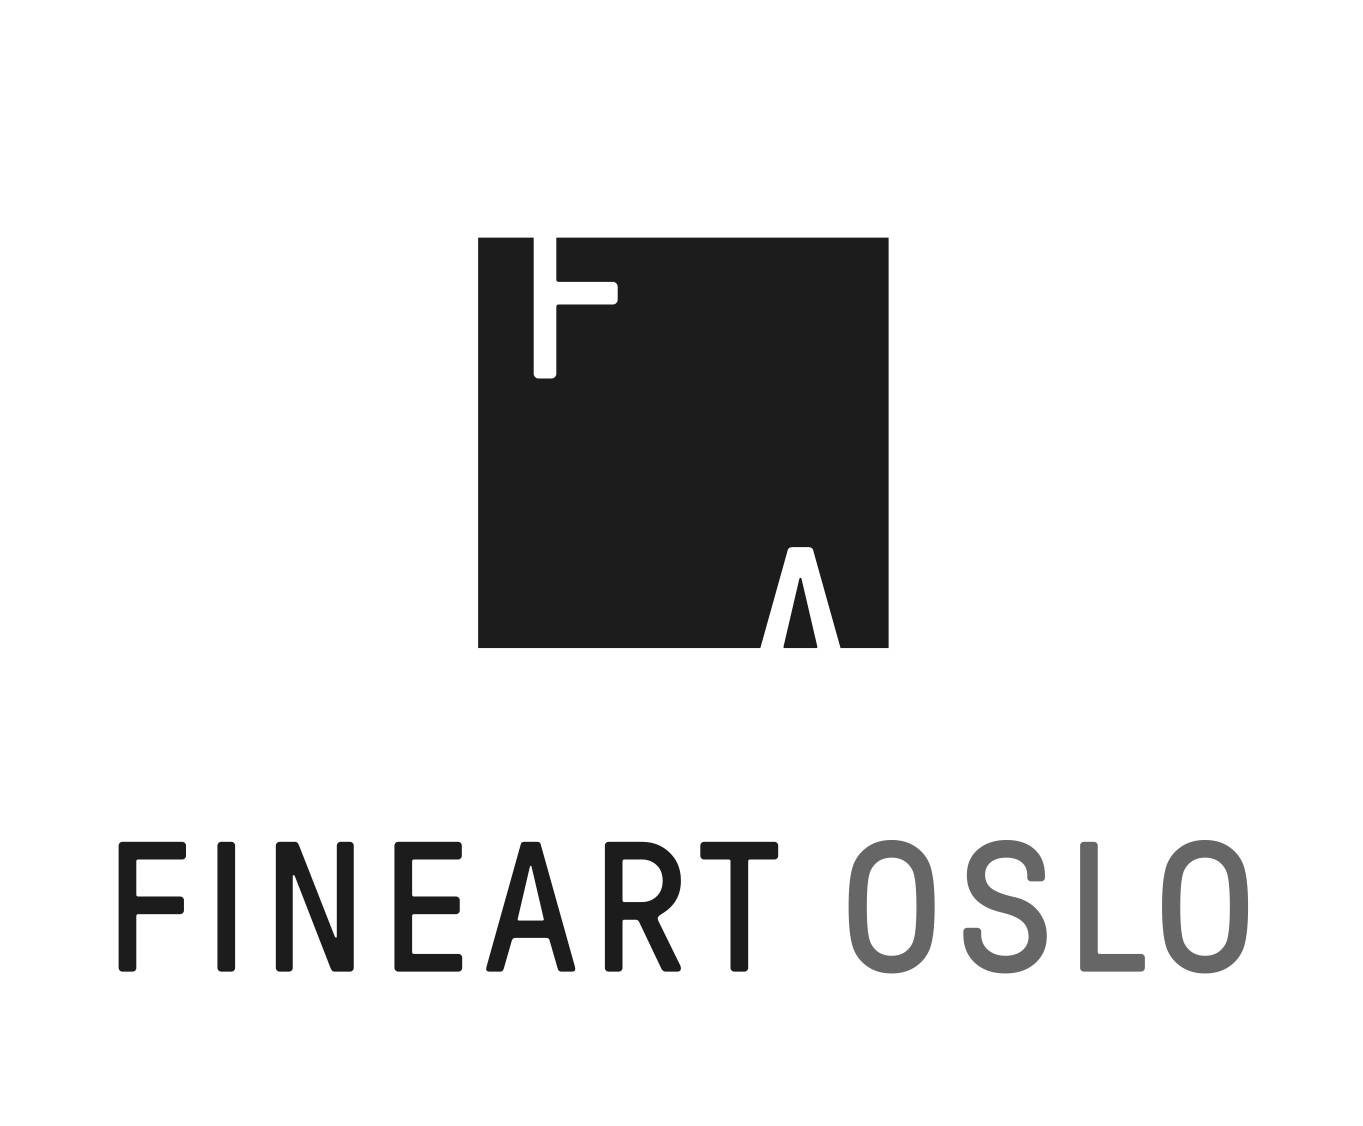 FINEART OSLO: Representing gallery thumbnail